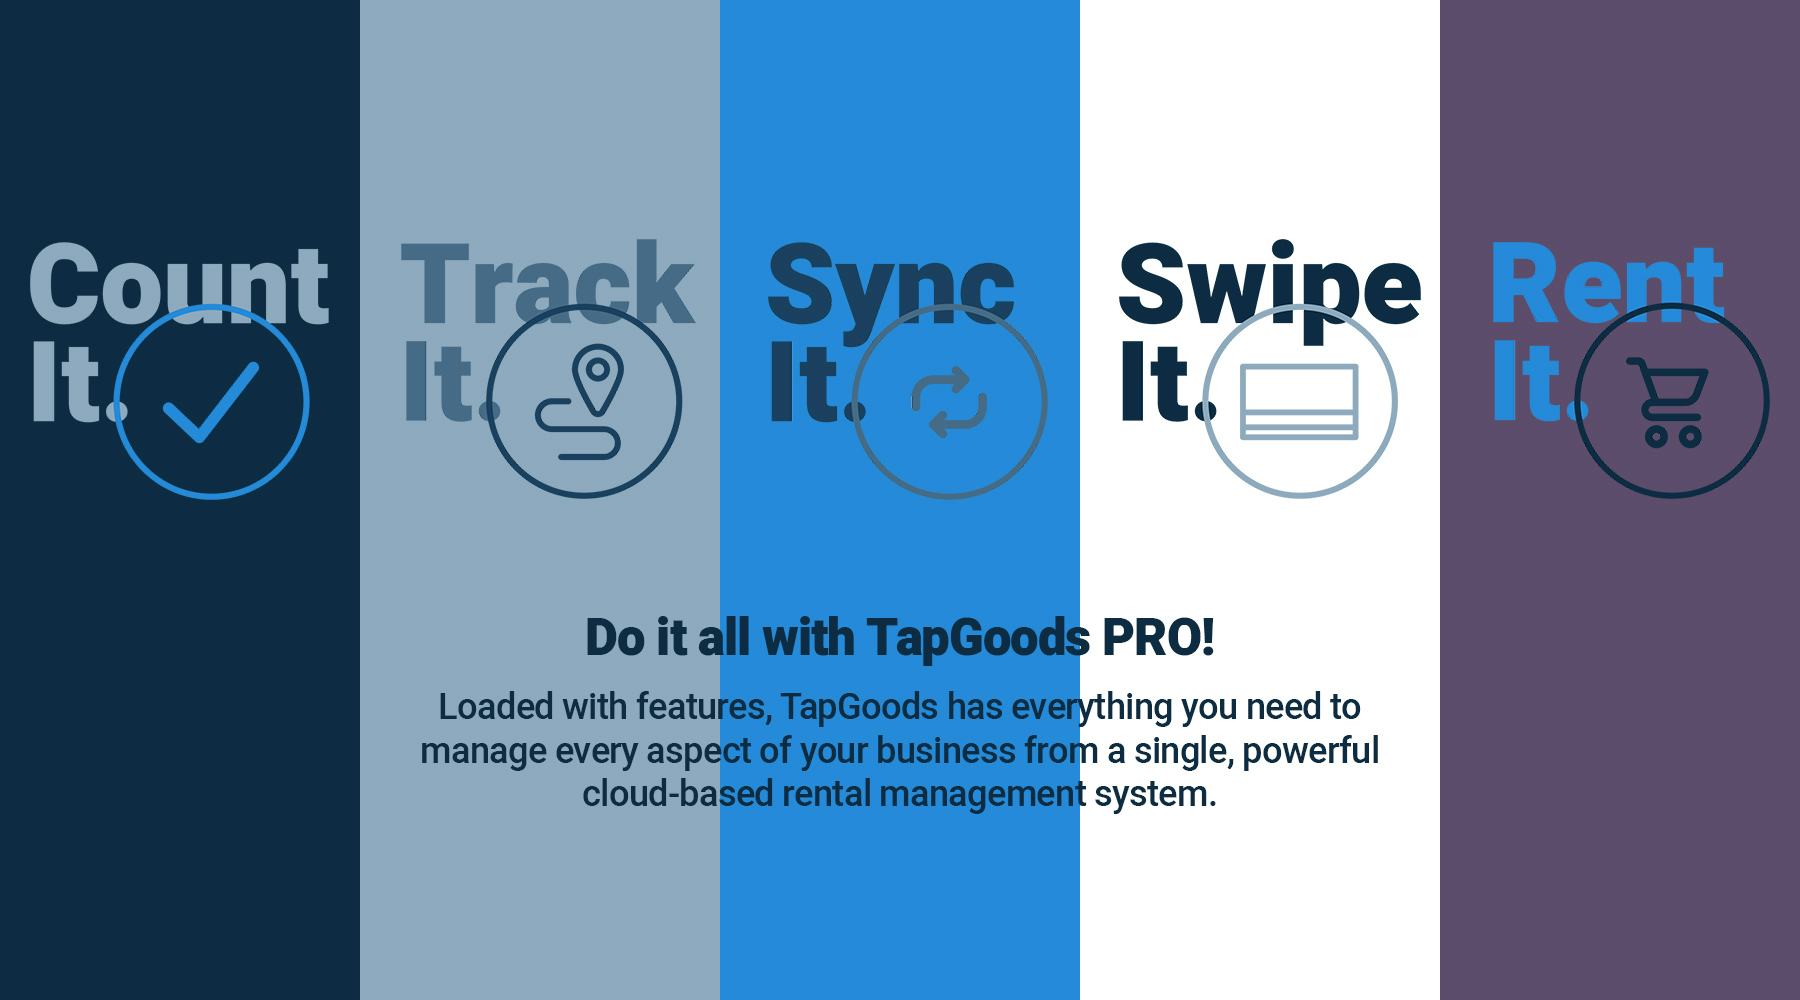 TapGoods PRO Software - With TapGoods, do it all - and make it look easy!